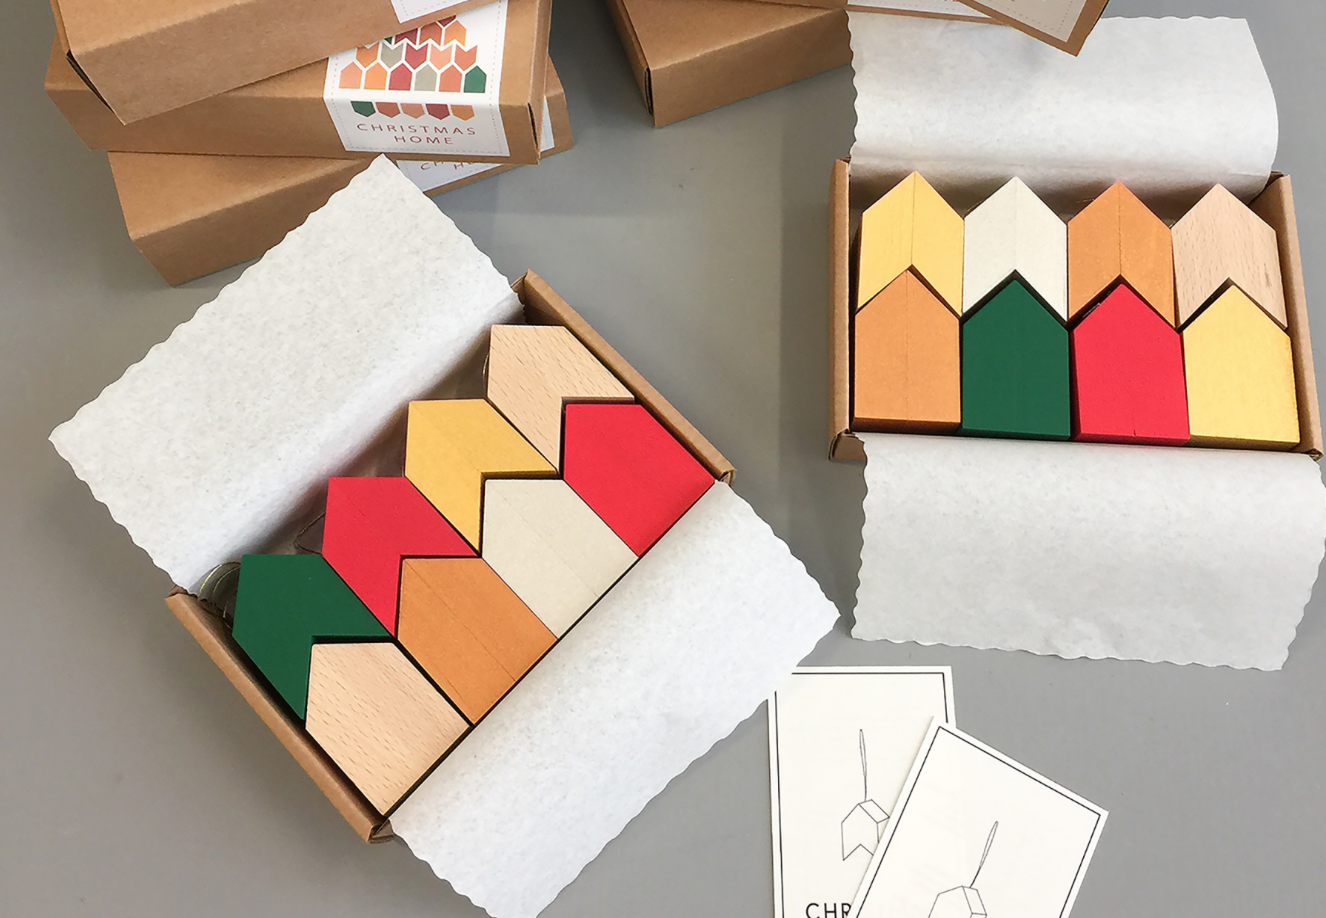 Tiny Christmas houses - wood decorations by Madrid's Mad-Lab, 41.20 euros for box of 8